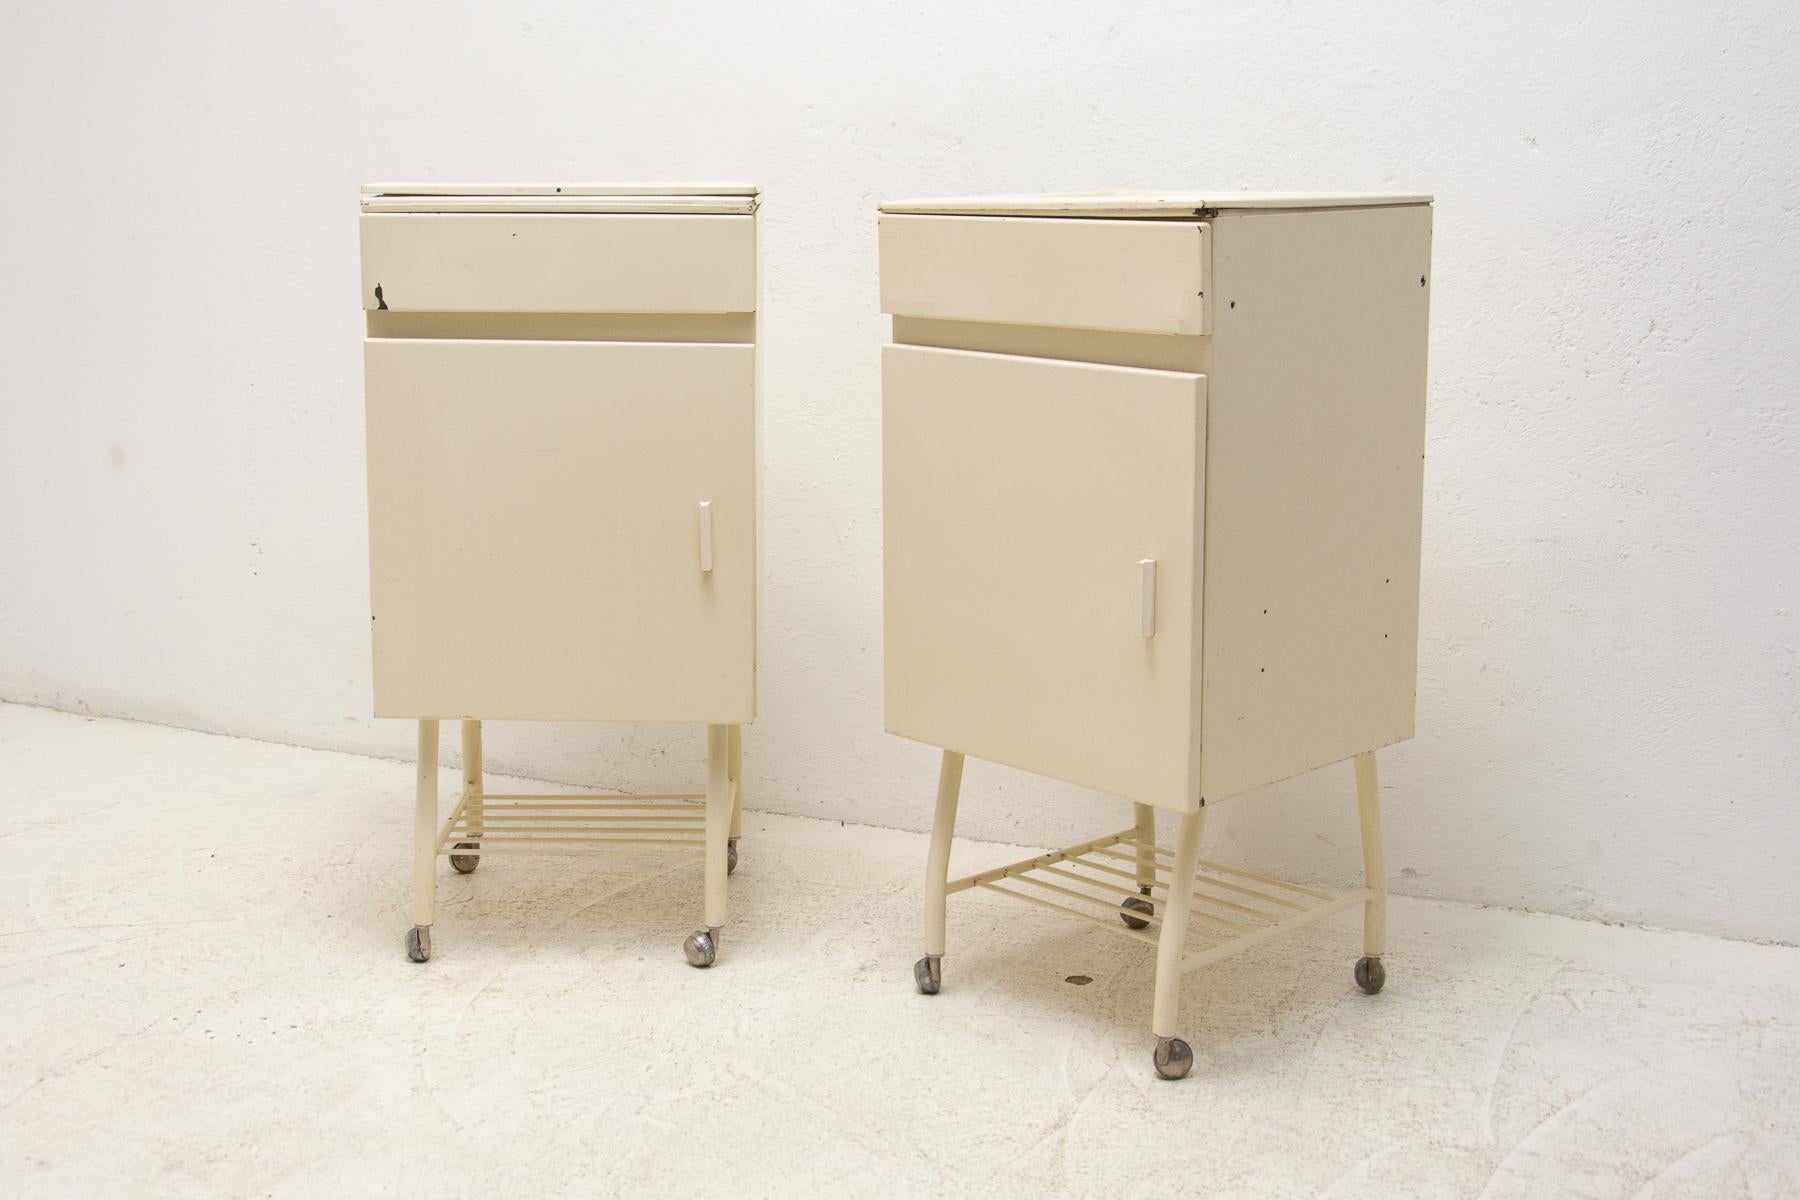 20th Century Pair of Tin Industrial Bedside Tables, 1970s, Czechoslovakia For Sale